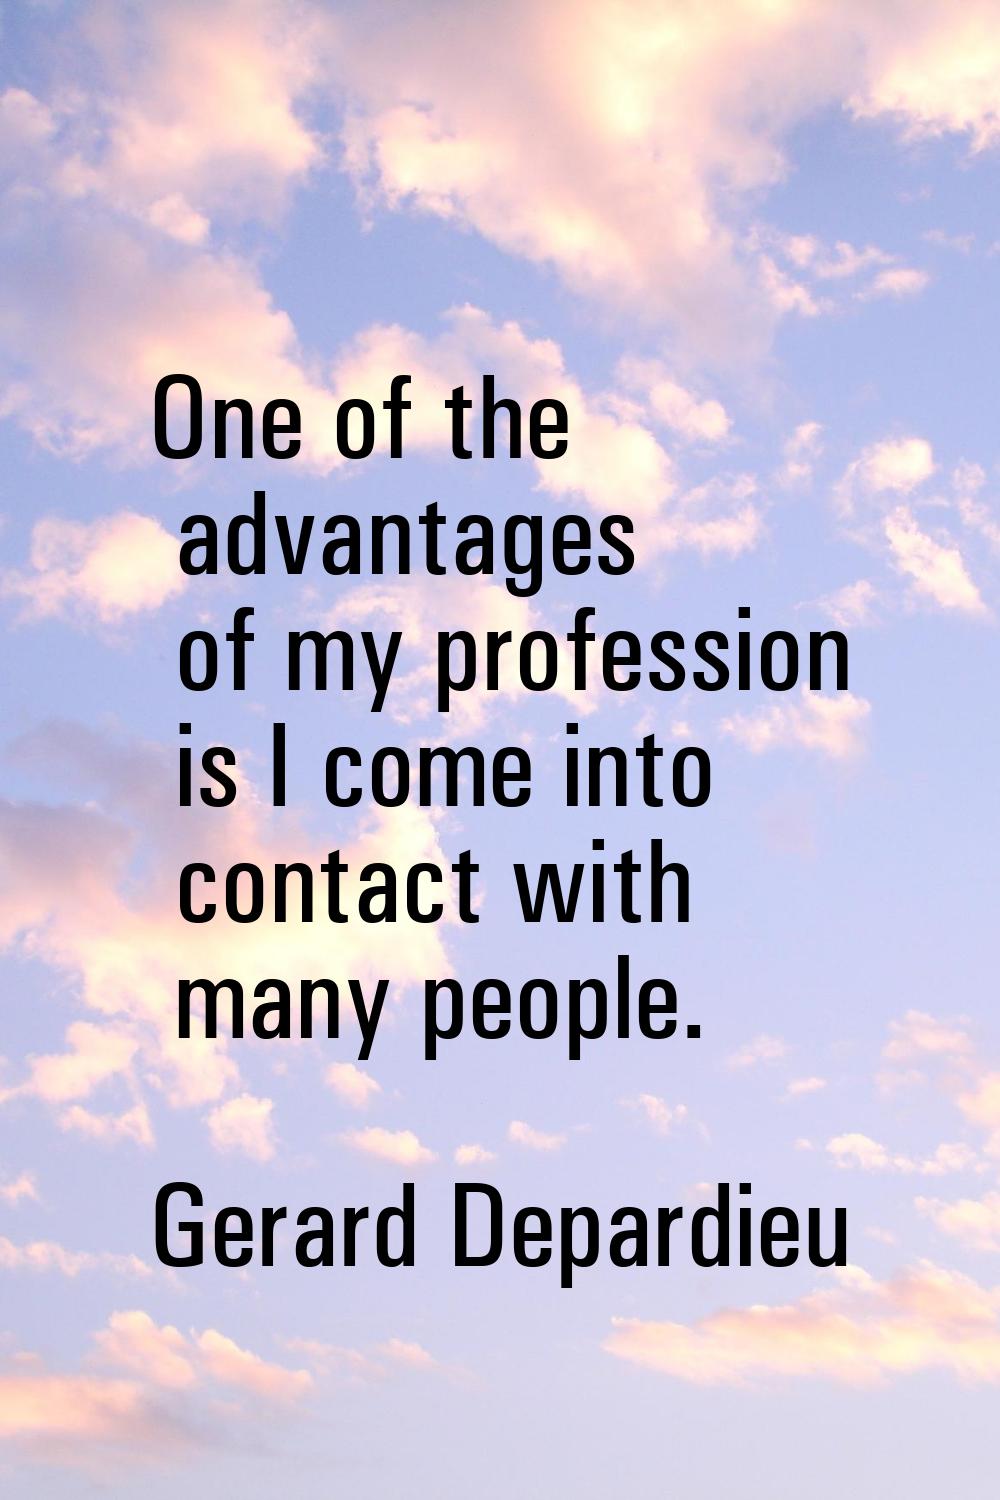 One of the advantages of my profession is I come into contact with many people.